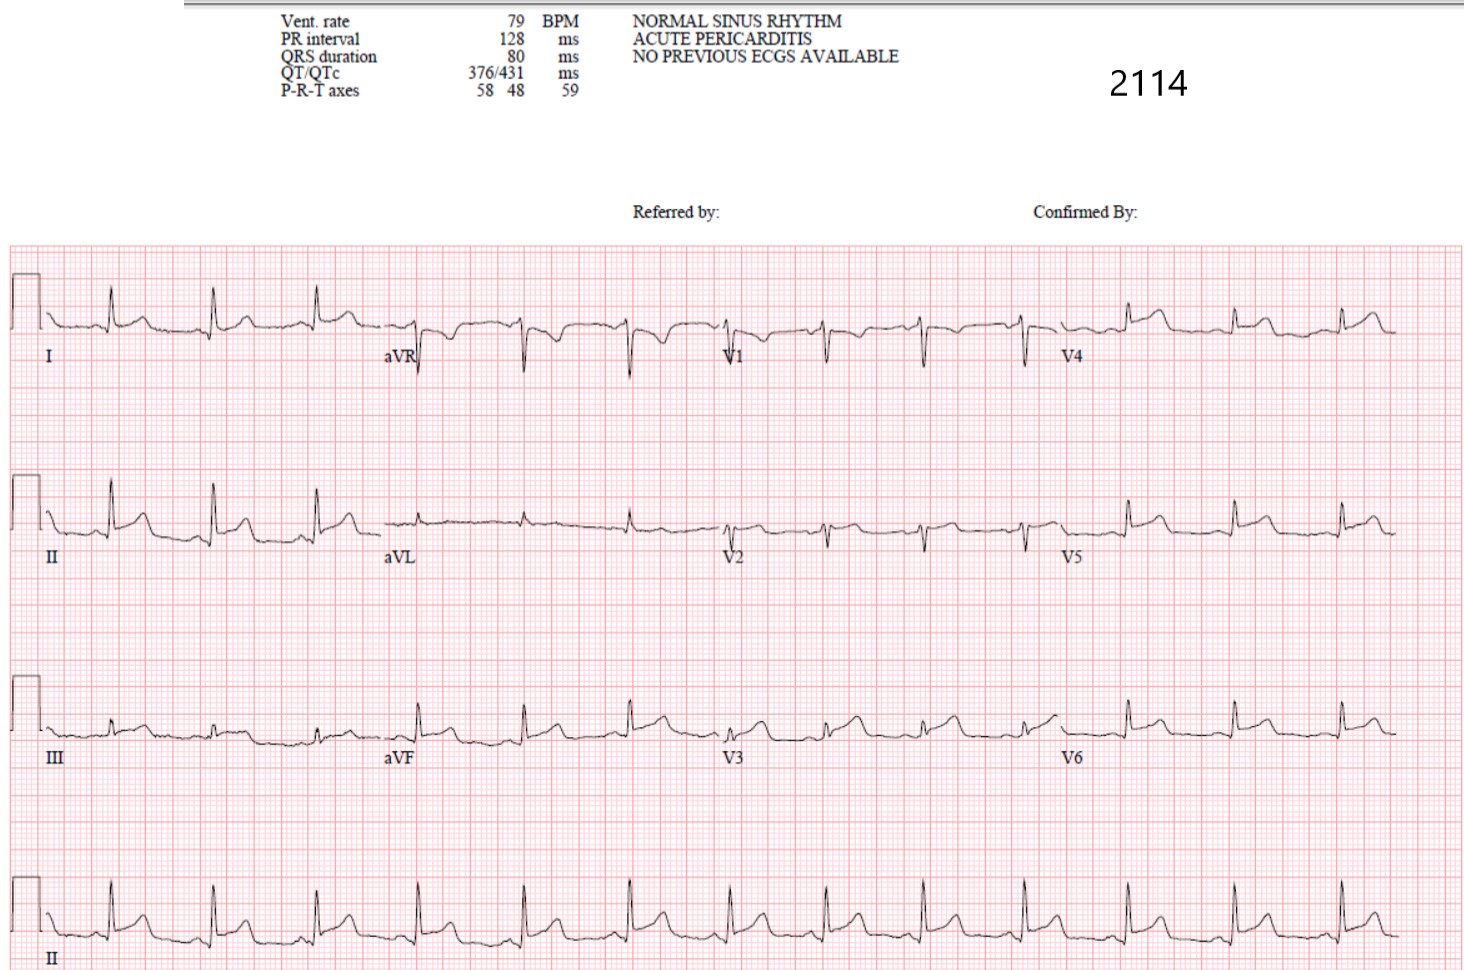 Dr. Smith's ECG Blog: You Diagnose Pericarditis at your Peril (at the